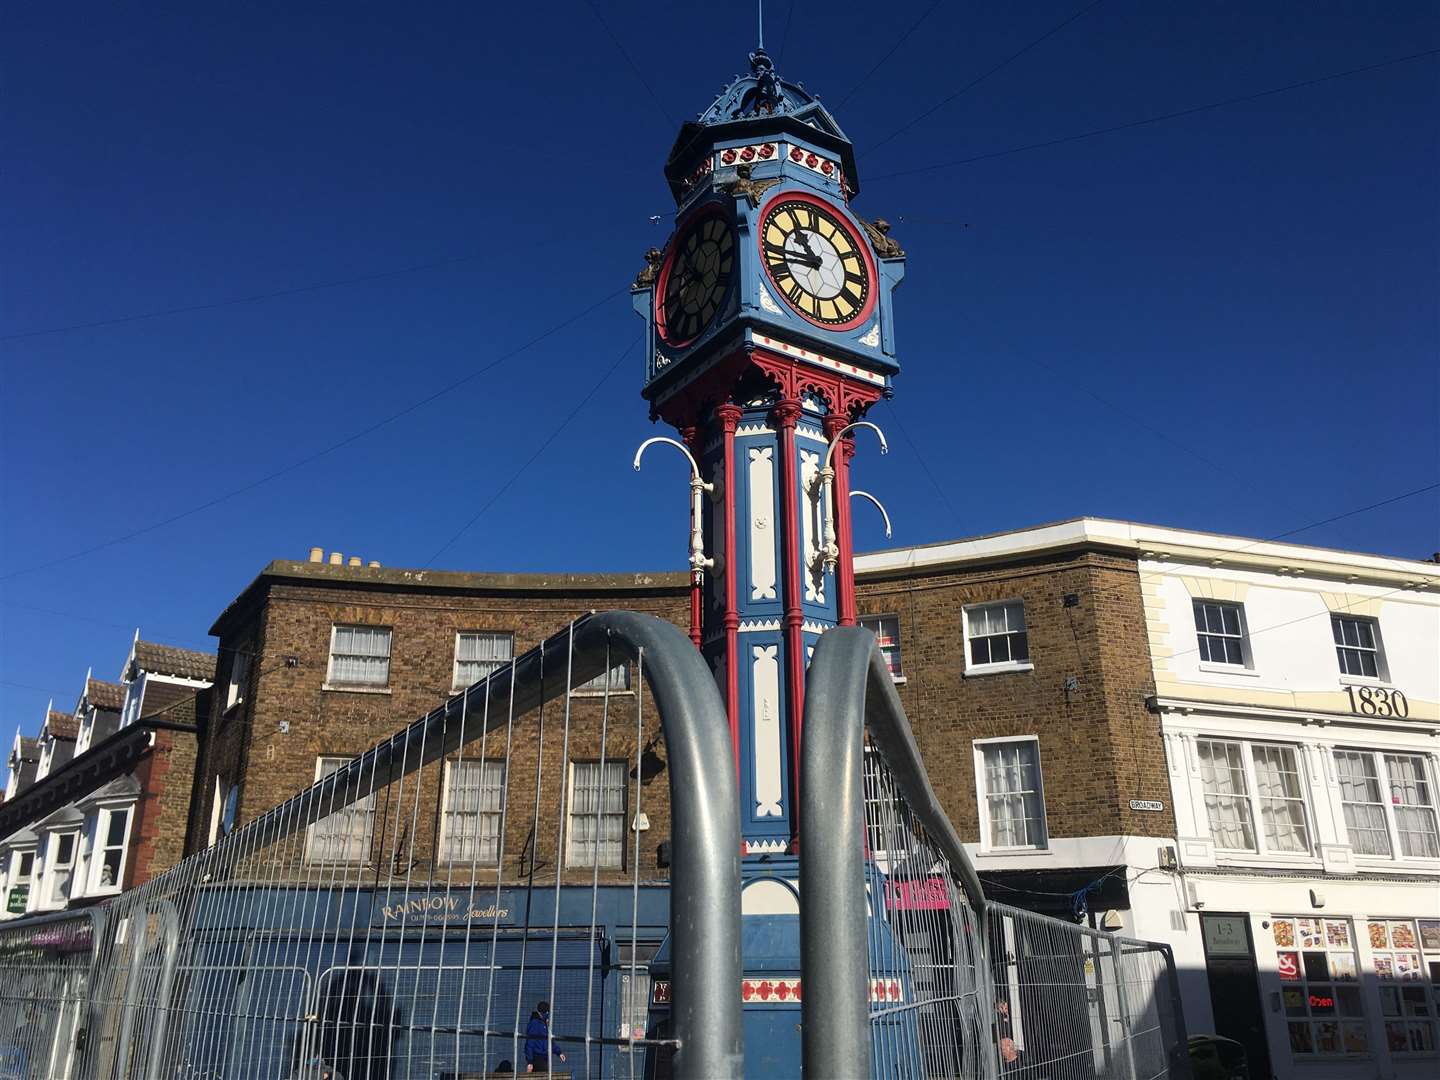 Sheerness clock tower fenced off to shoppers by barriers because of dangerous metal fatigue at the top